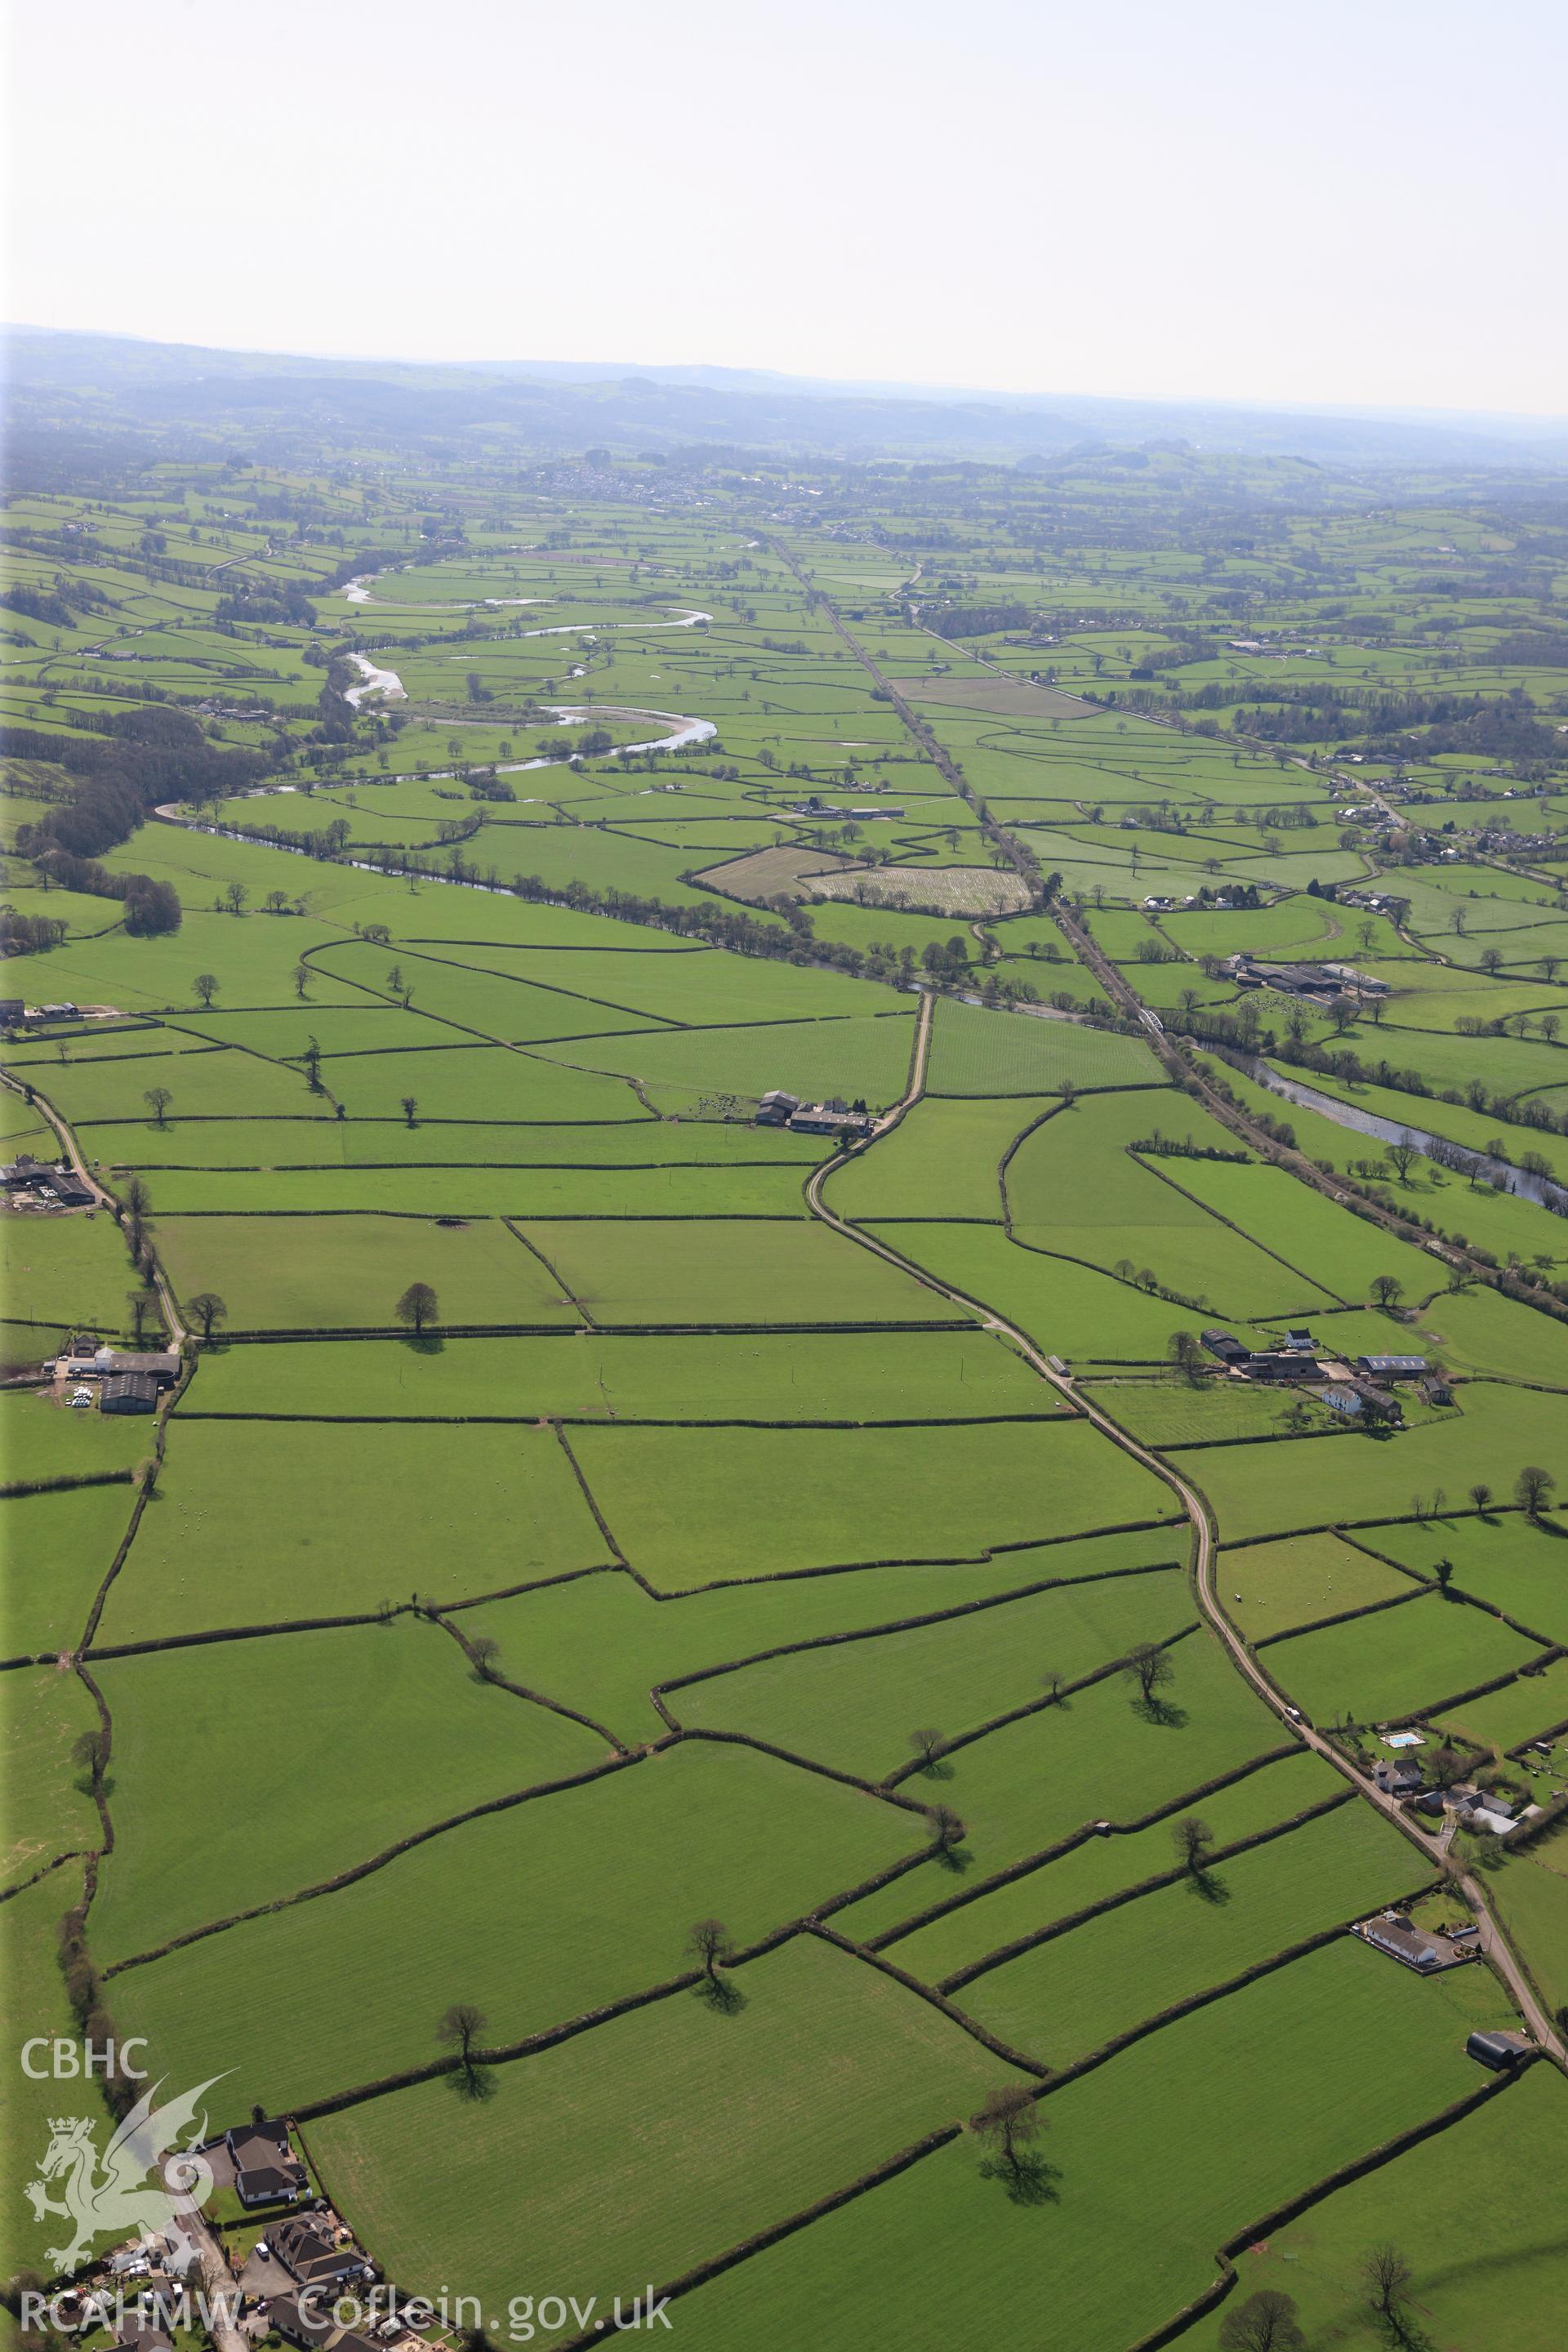 RCAHMW colour oblique photograph of View along Tywi Valley, looking southwest. Taken by Toby Driver on 08/04/2011.